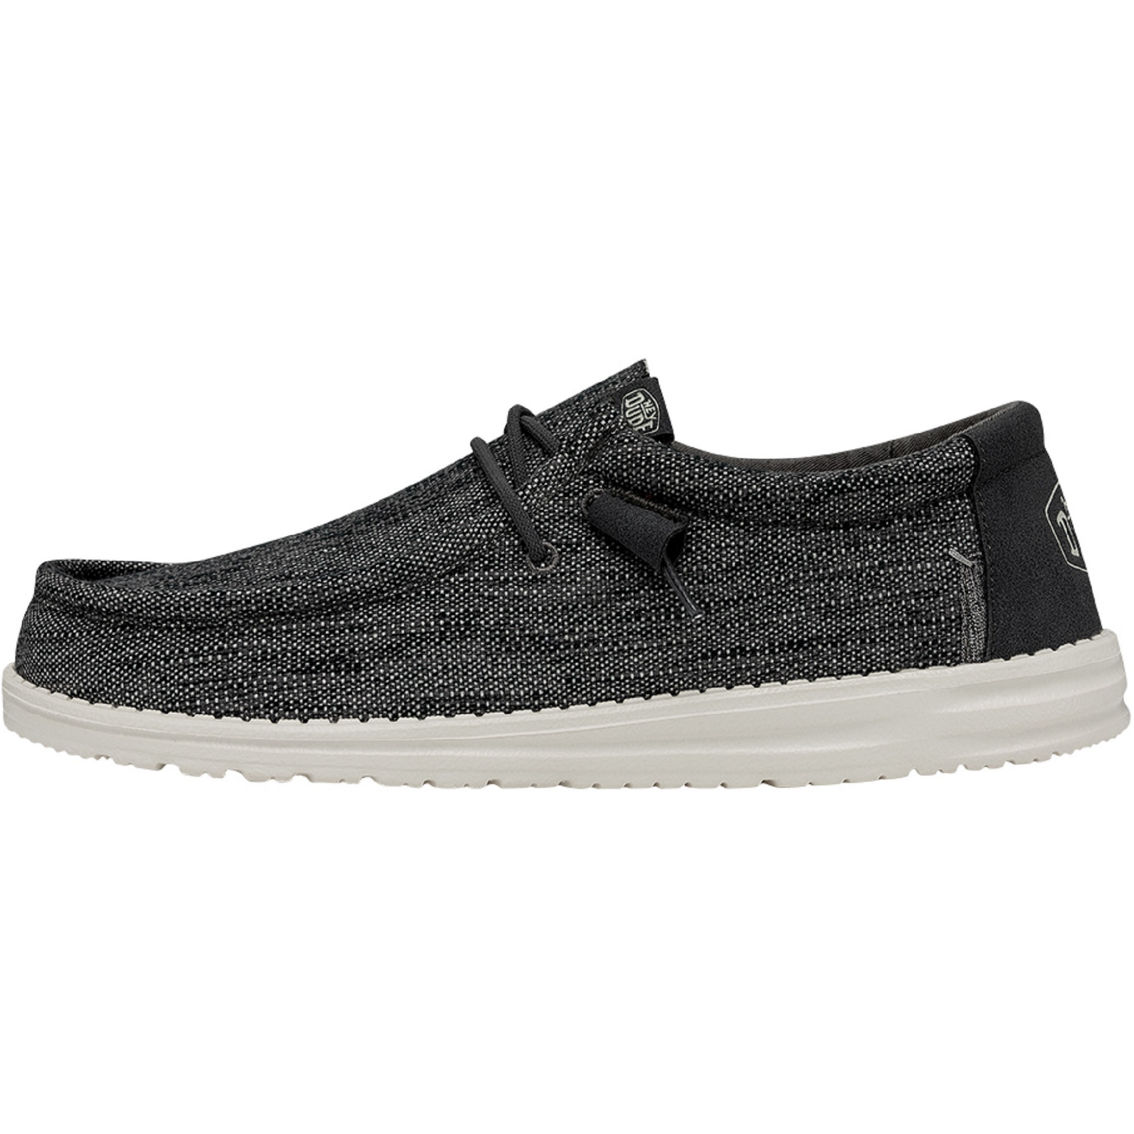 Hey Dude Wally Ascend Woven Abyss Casual Slip On Shoes | Casuals ...